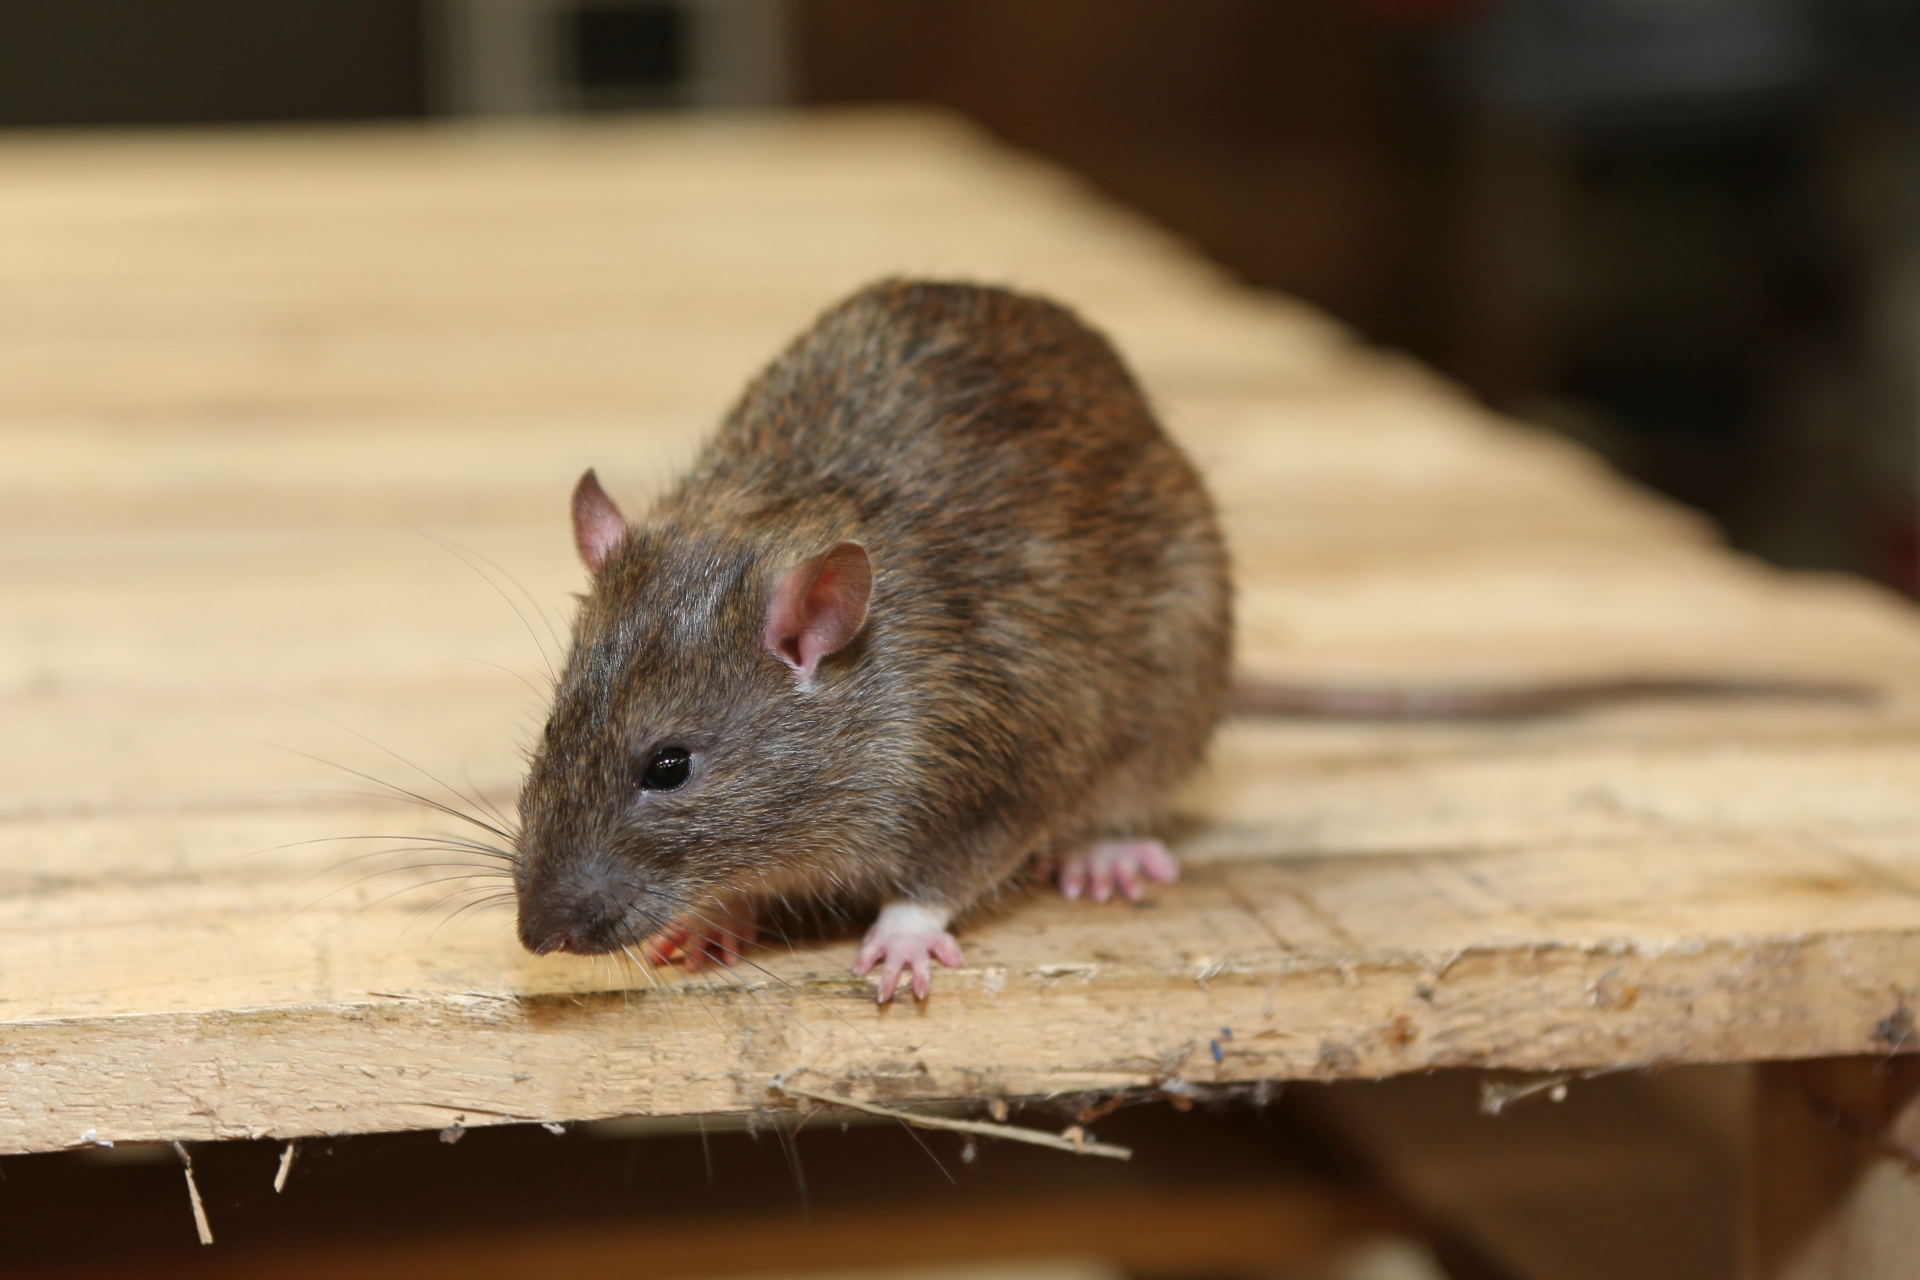 Rat Infestation, Pest Control in Staines-upon-Thames, Egham Hythe, TW18. Call Now 020 8166 9746